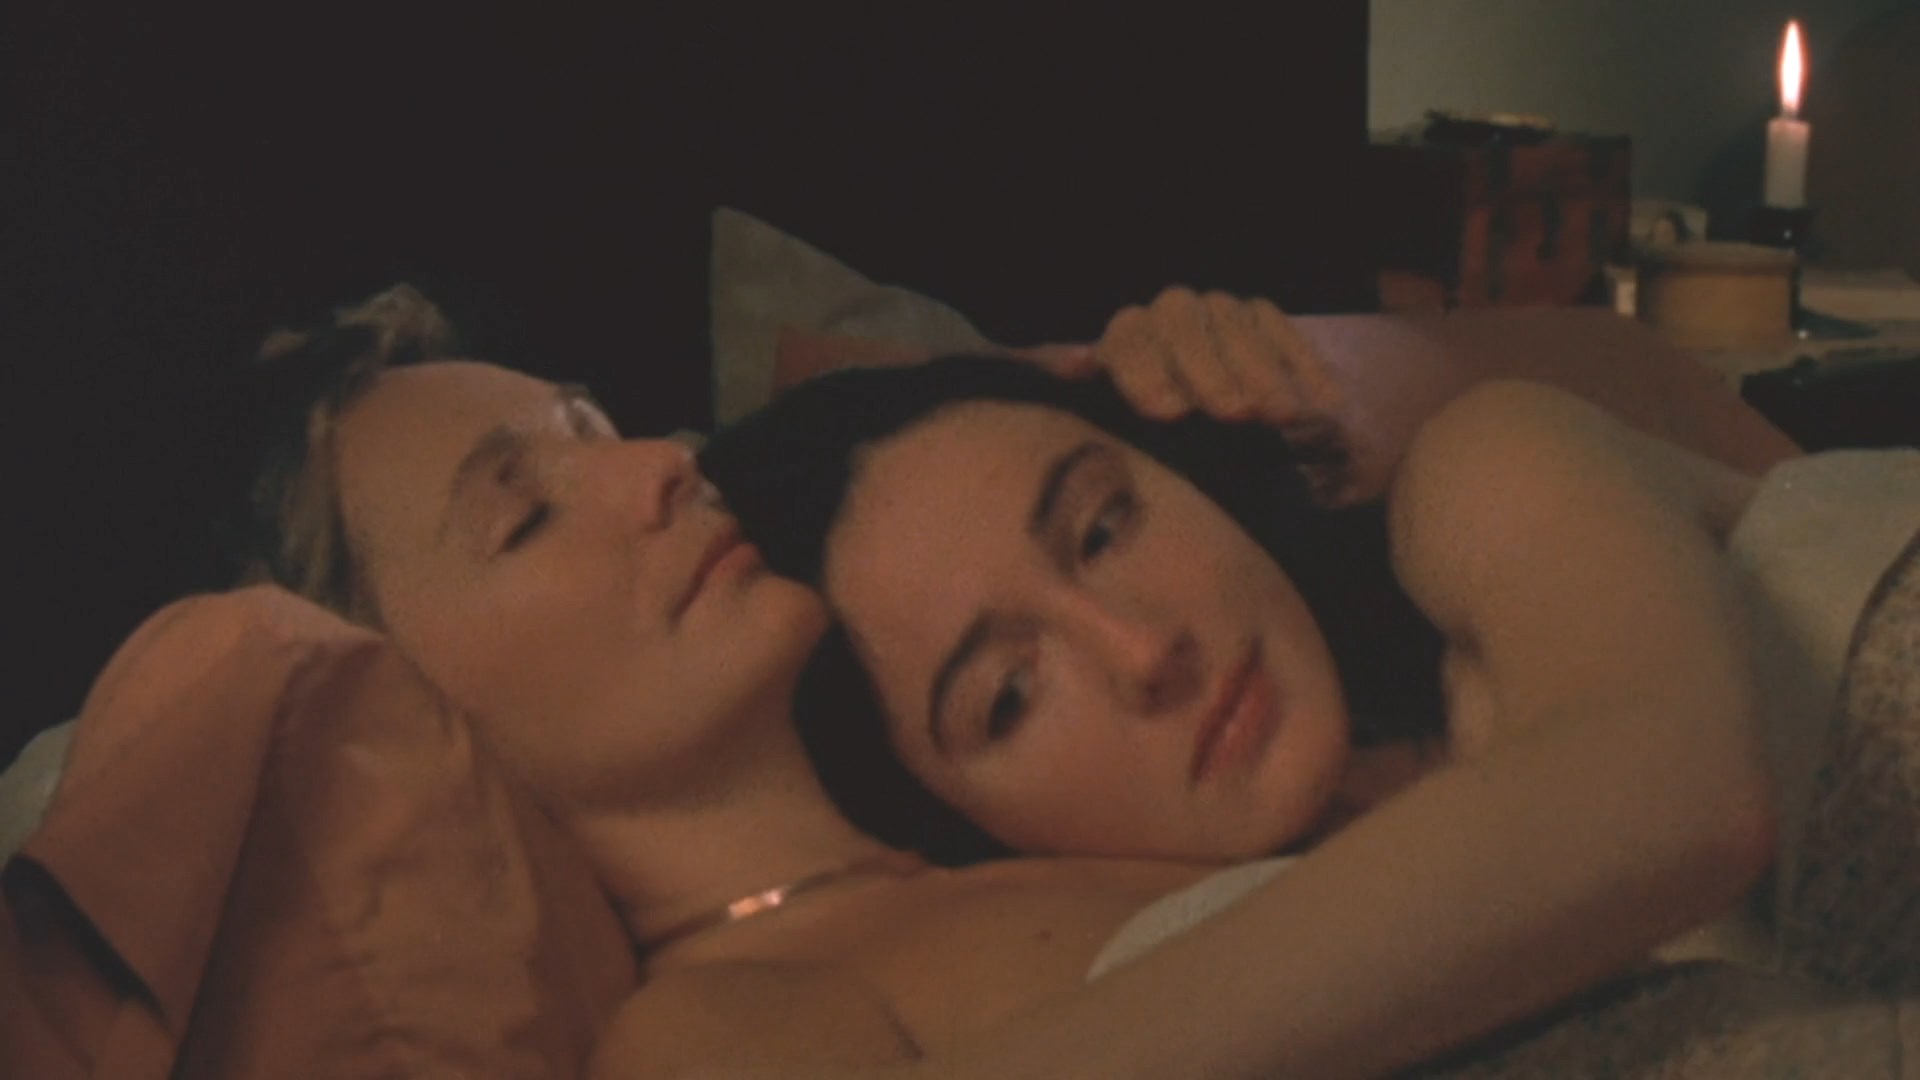 Linda Griffiths and Jane Hallaren are laying naked on the bed and chatting.